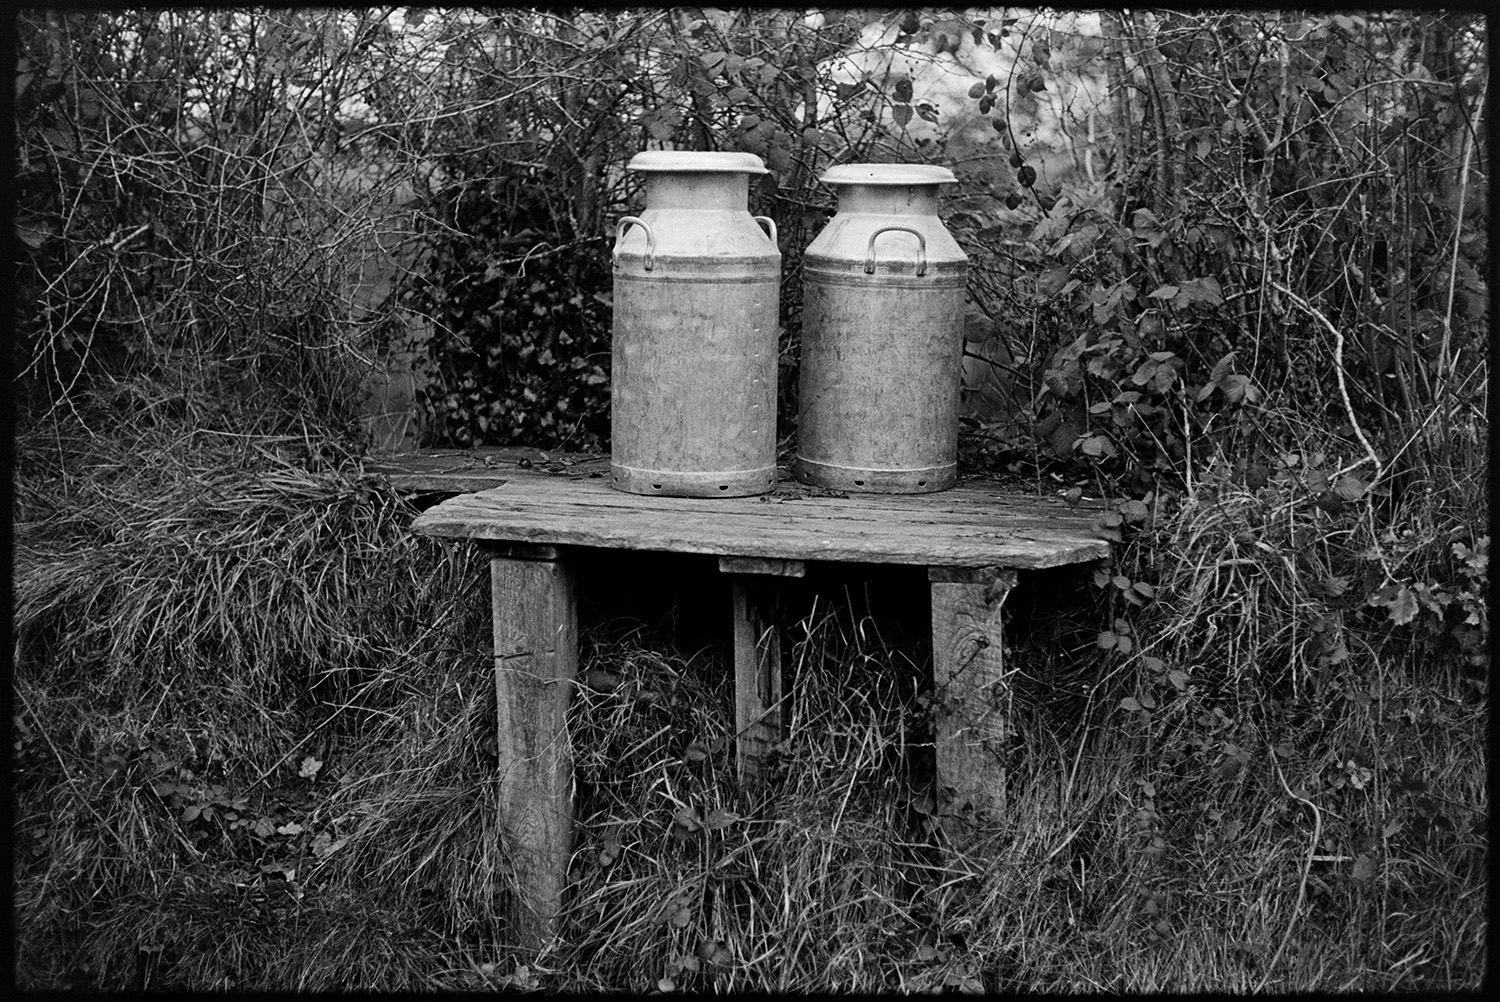 Two milk churns on stand in hedge. 
[Two milk churns on a wooden milk churn stand in a hedge with brambles at Woolridge, Dolton.]